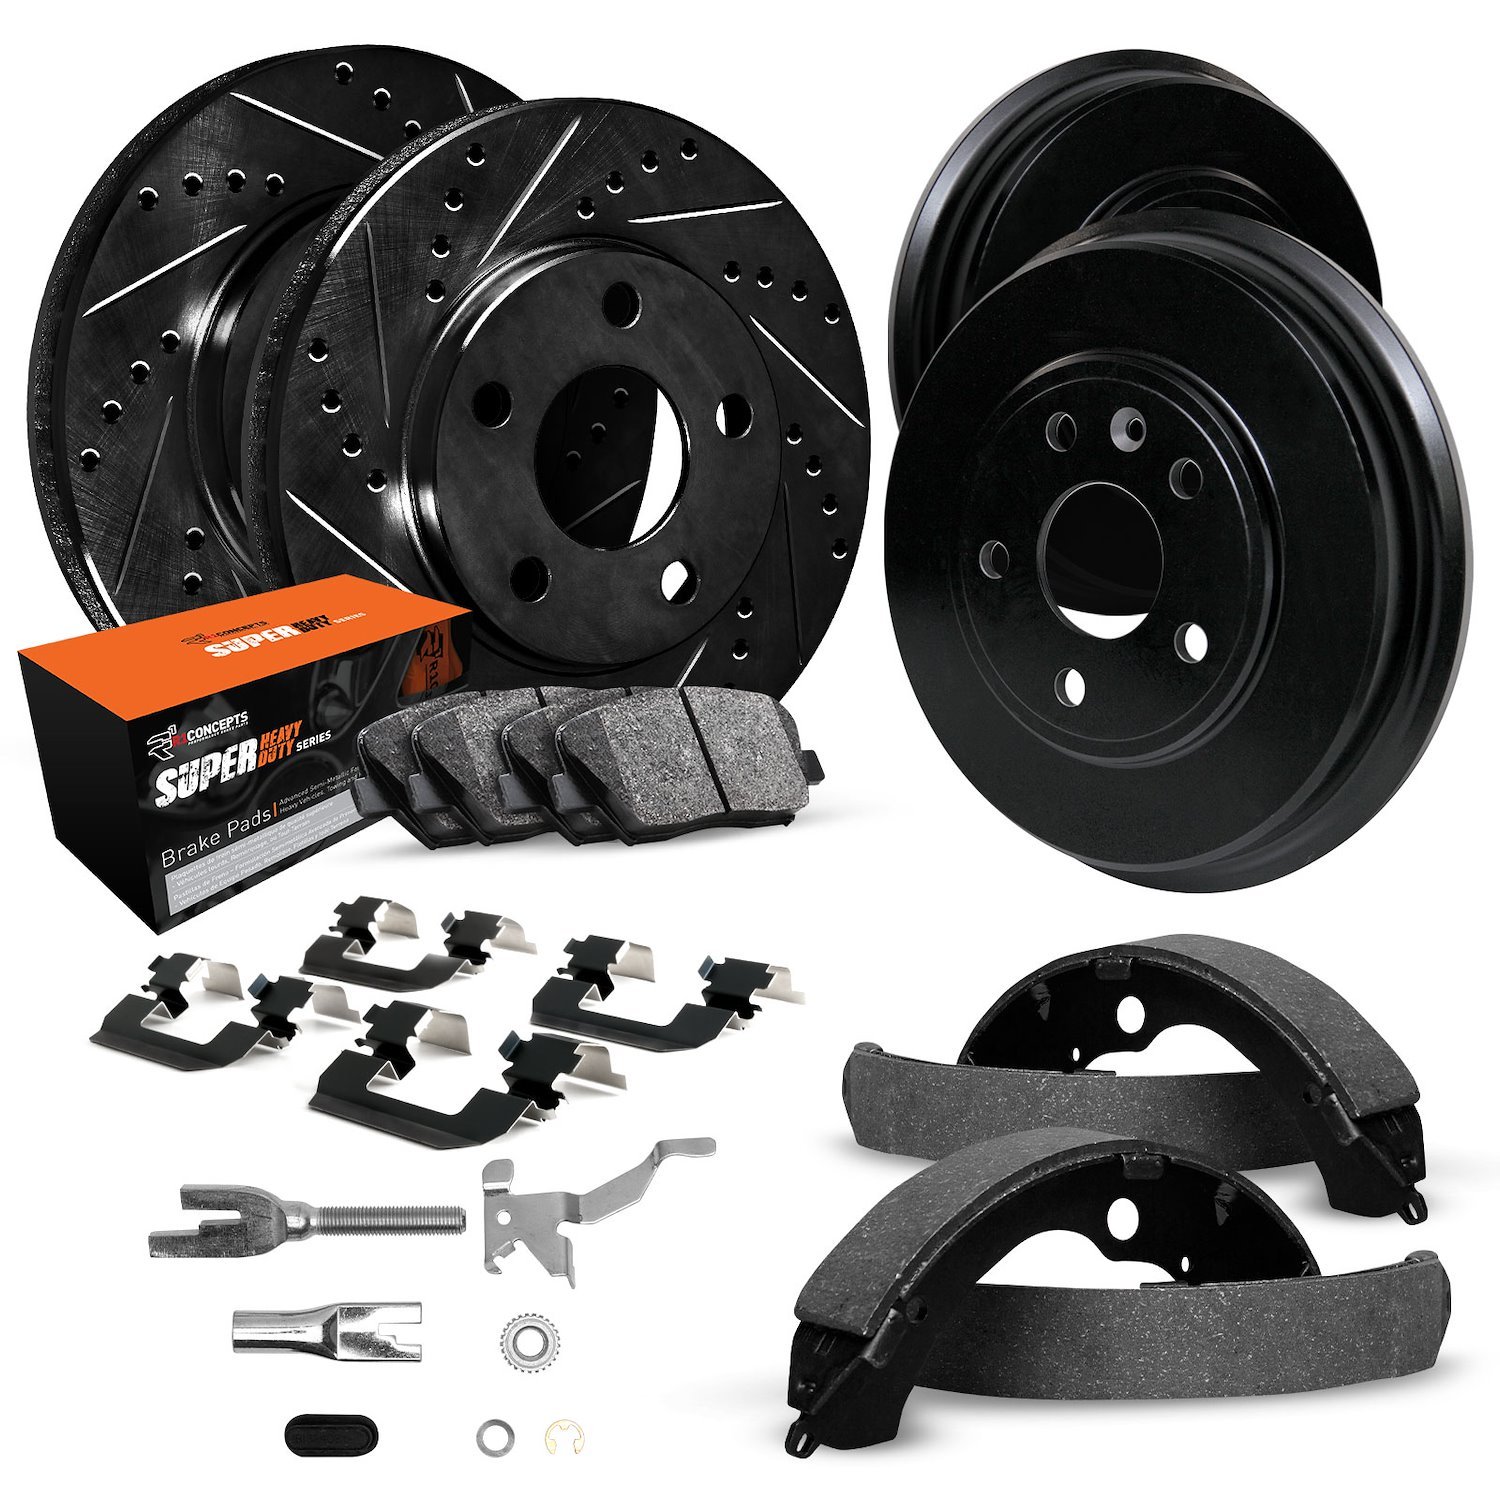 E-Line Slotted Black Brake Rotor & Drum Set w/Super-Duty Pads, Shoes, Hardware/Adjusters, 1992-1994 Ford/Lincoln/Mercury/Mazda